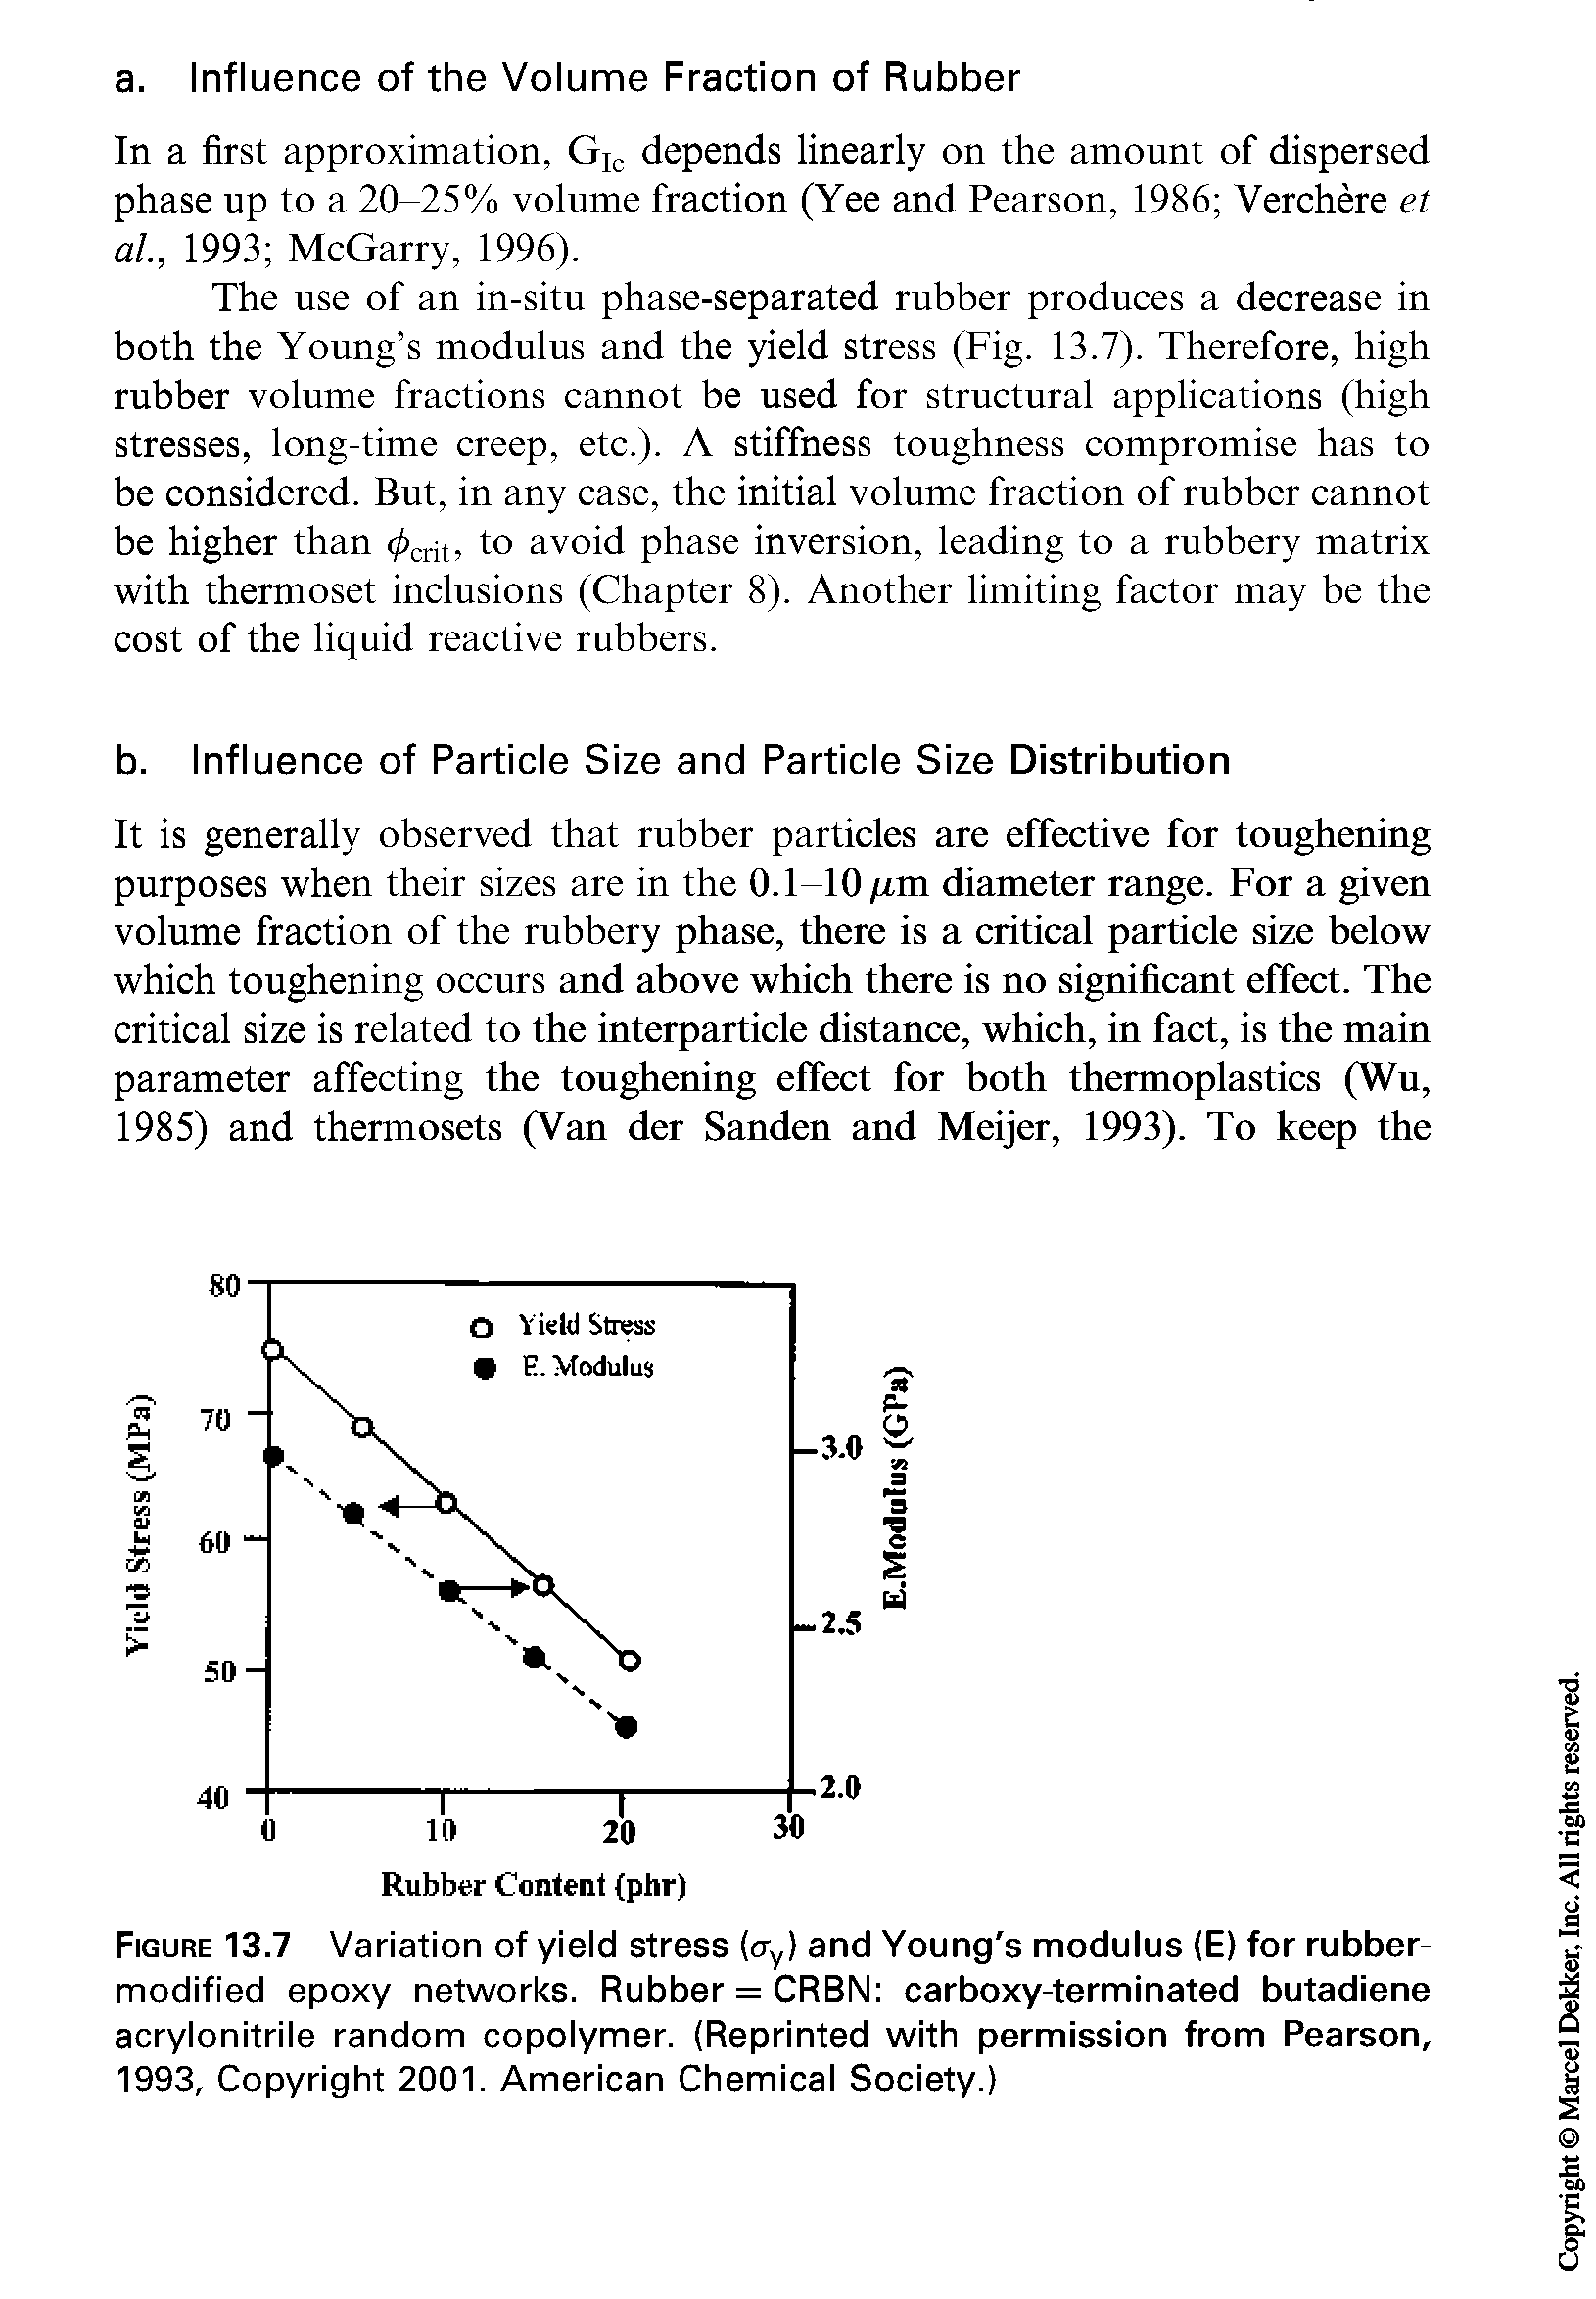 Figure 13.7 Variation of yield stress (<ry) and Young s modulus (E) for rubber-modified epoxy networks. Rubber = CRBN carboxy-terminated butadiene acrylonitrile random copolymer. (Reprinted with permission from Pearson, 1993, Copyright 2001. American Chemical Society.)...